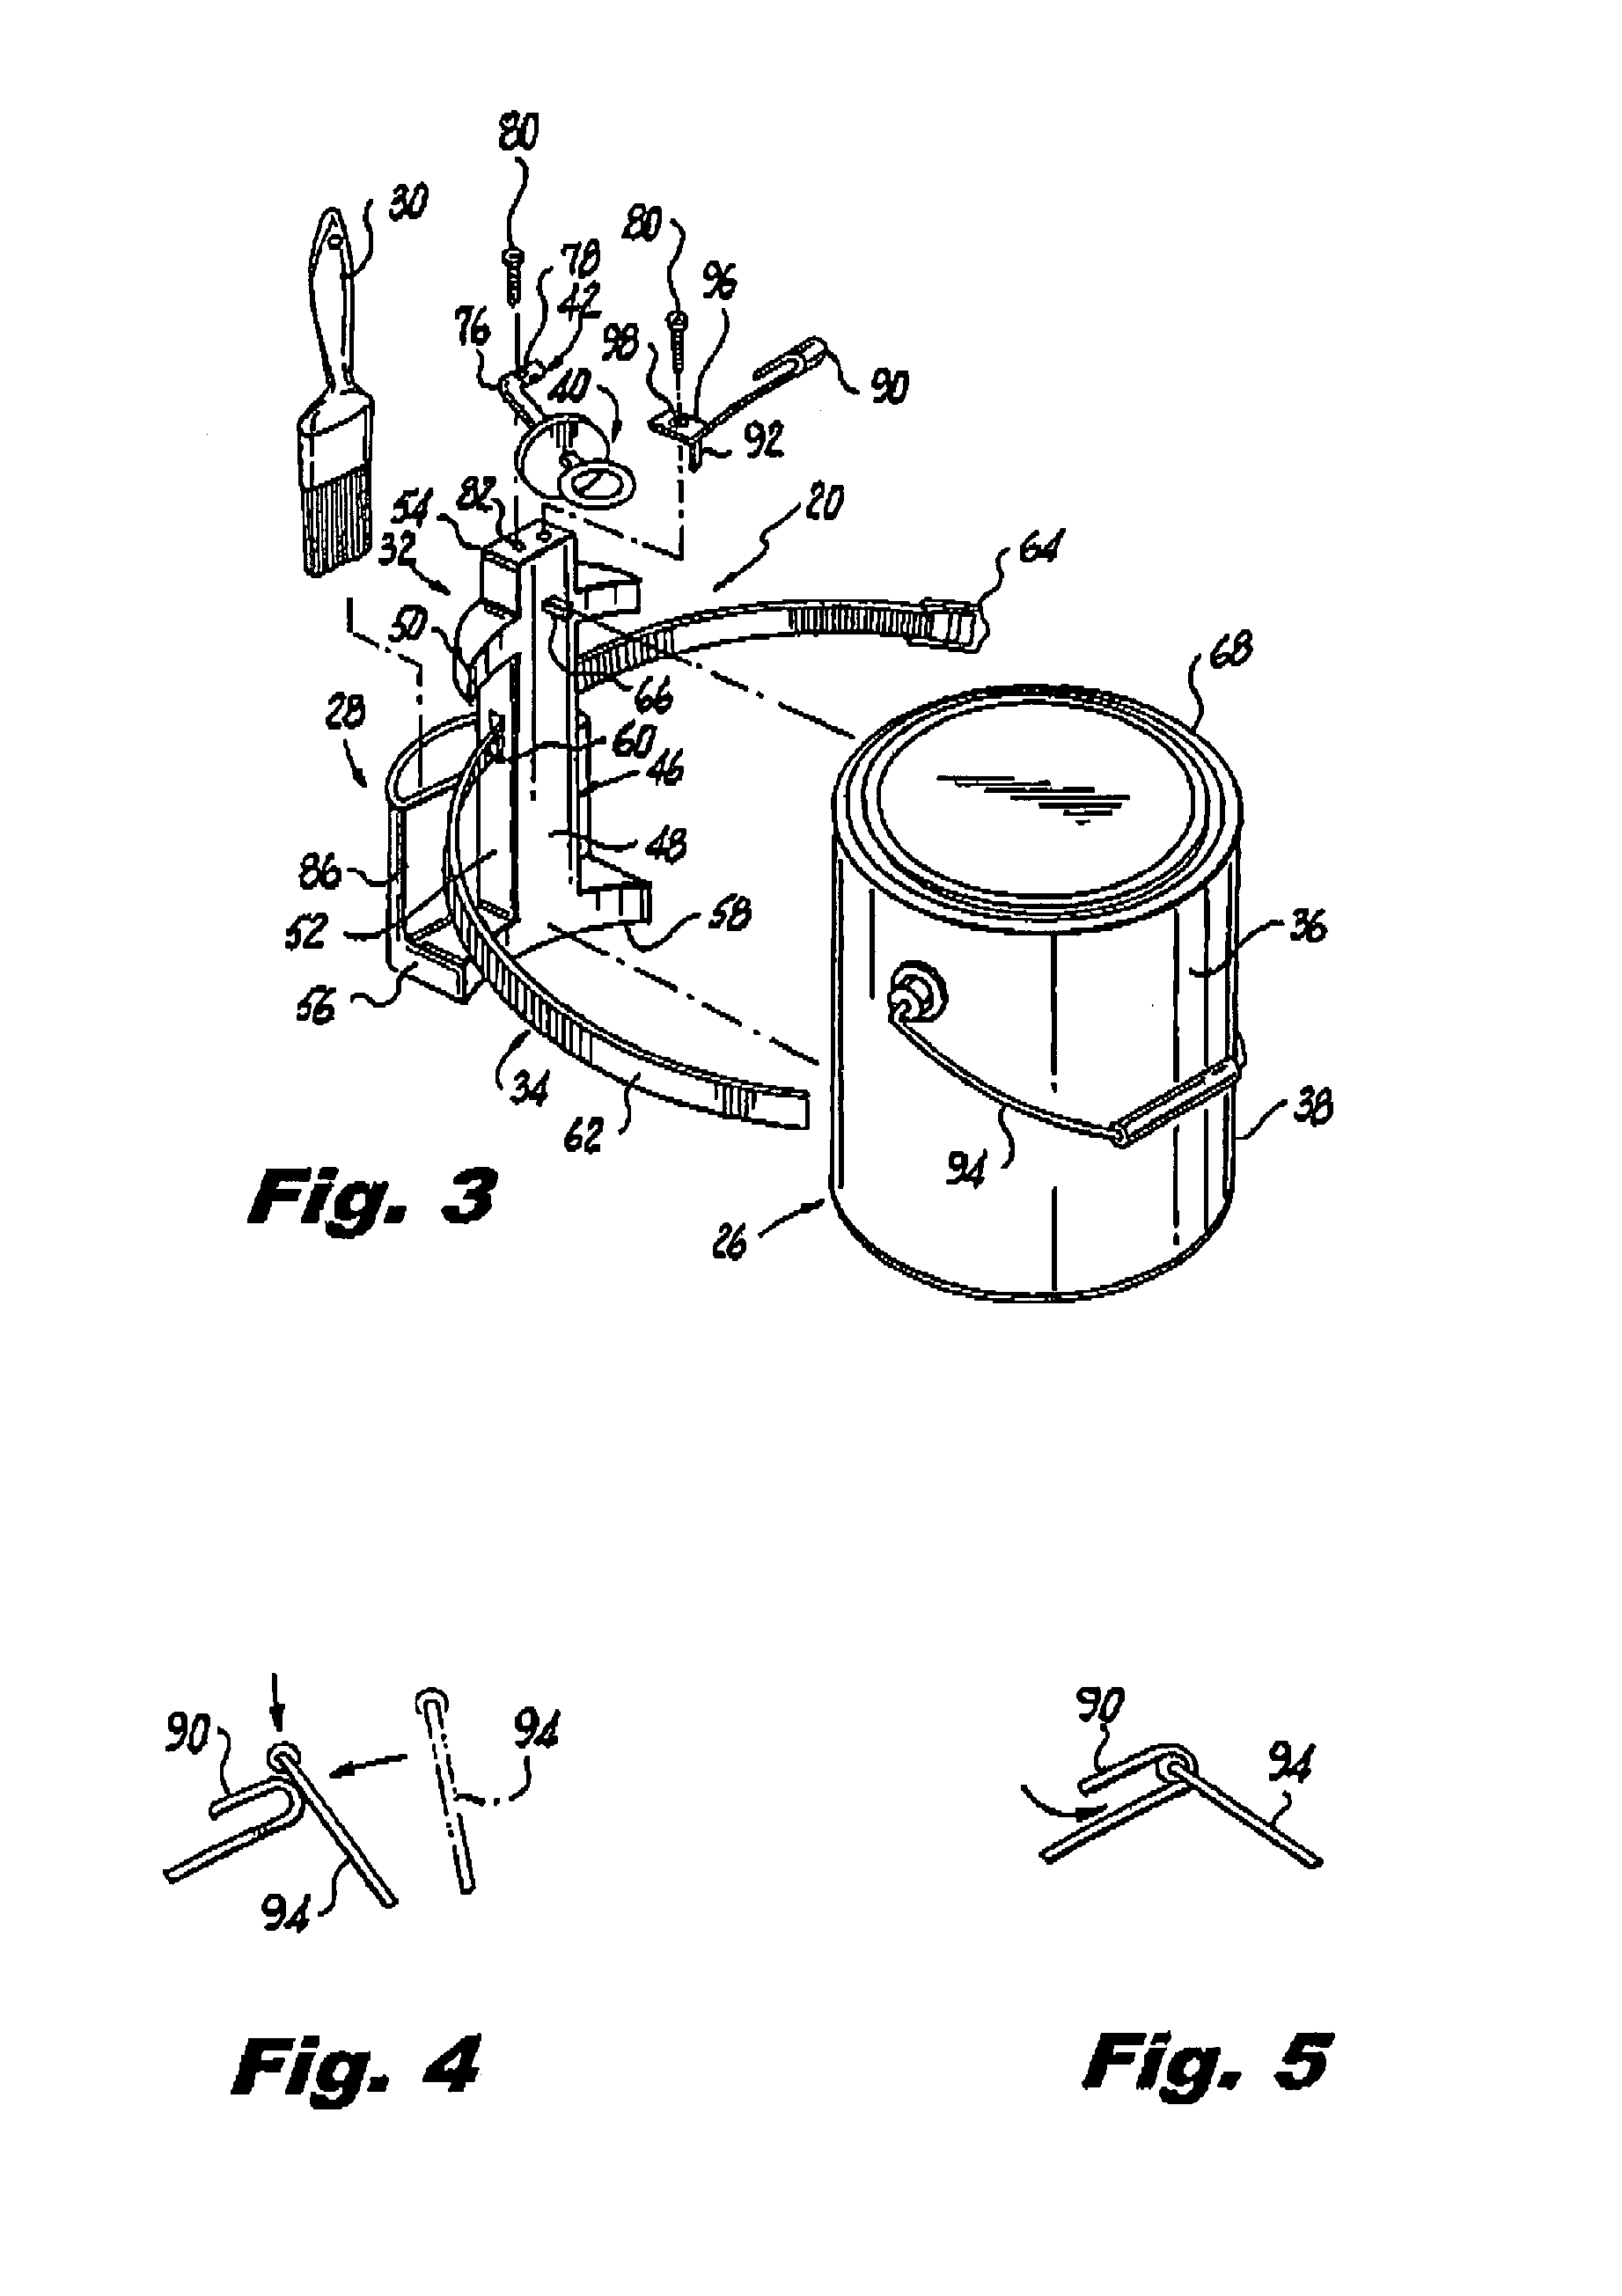 Apparatus for delivering paint to a paint roller directly from a paint can with a compartment for holding a paint brush